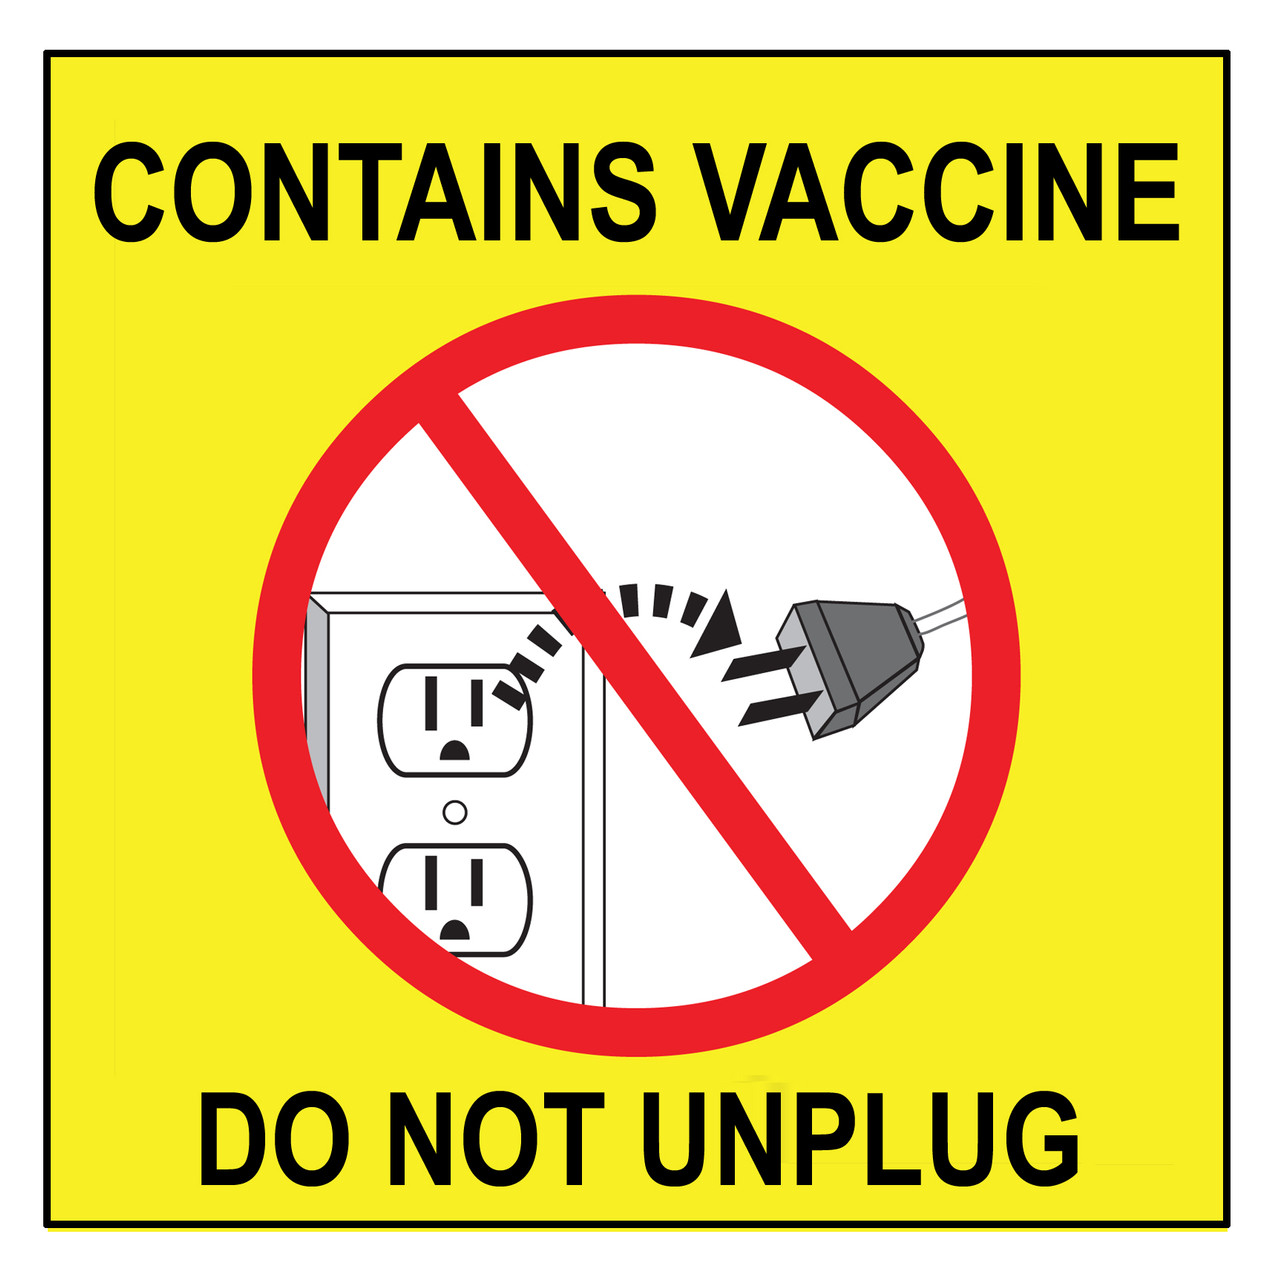 Refrigerator Magnet, Contains Vaccine Do Not Unplug, 4" x 4",  2/pack